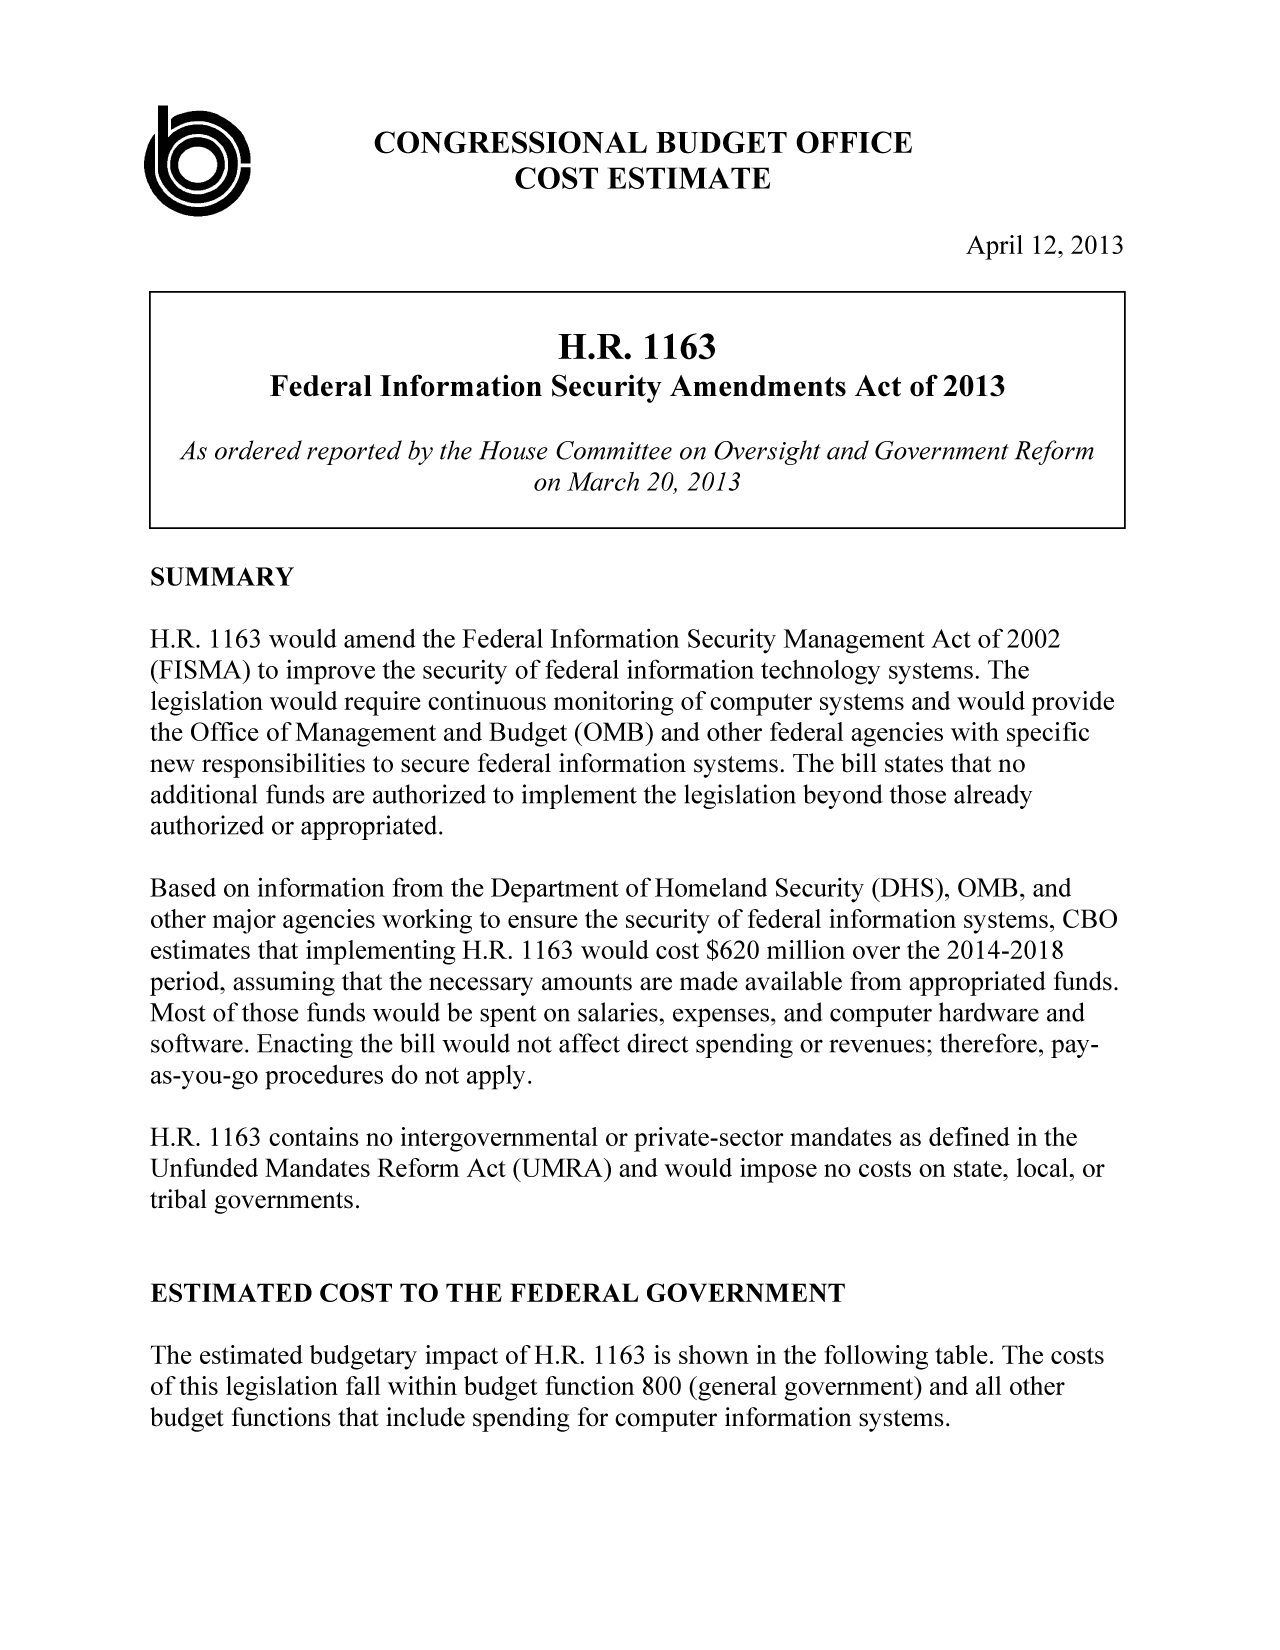 handle is hein.congrec/cbo11075 and id is 1 raw text is: CONGRESSIONAL BUDGET OFFICE
0:                            COST ESTIMATE
April 12, 2013
H.R. 1163
Federal Information Security Amendments Act of 2013
As ordered reported by the House Committee on Oversight and Government Reform
on March 20, 2013
SUMMARY
H.R. 1163 would amend the Federal Information Security Management Act of 2002
(FISMA) to improve the security of federal information technology systems. The
legislation would require continuous monitoring of computer systems and would provide
the Office of Management and Budget (OMB) and other federal agencies with specific
new responsibilities to secure federal information systems. The bill states that no
additional funds are authorized to implement the legislation beyond those already
authorized or appropriated.
Based on information from the Department of Homeland Security (DHS), OMB, and
other major agencies working to ensure the security of federal information systems, CBO
estimates that implementing H.R. 1163 would cost $620 million over the 2014-2018
period, assuming that the necessary amounts are made available from appropriated funds.
Most of those funds would be spent on salaries, expenses, and computer hardware and
software. Enacting the bill would not affect direct spending or revenues; therefore, pay-
as-you-go procedures do not apply.
H.R. 1163 contains no intergovernmental or private-sector mandates as defined in the
Unfunded Mandates Reform Act (UMRA) and would impose no costs on state, local, or
tribal governments.
ESTIMATED COST TO THE FEDERAL GOVERNMENT
The estimated budgetary impact of H.R. 1163 is shown in the following table. The costs
of this legislation fall within budget function 800 (general government) and all other
budget functions that include spending for computer information systems.


